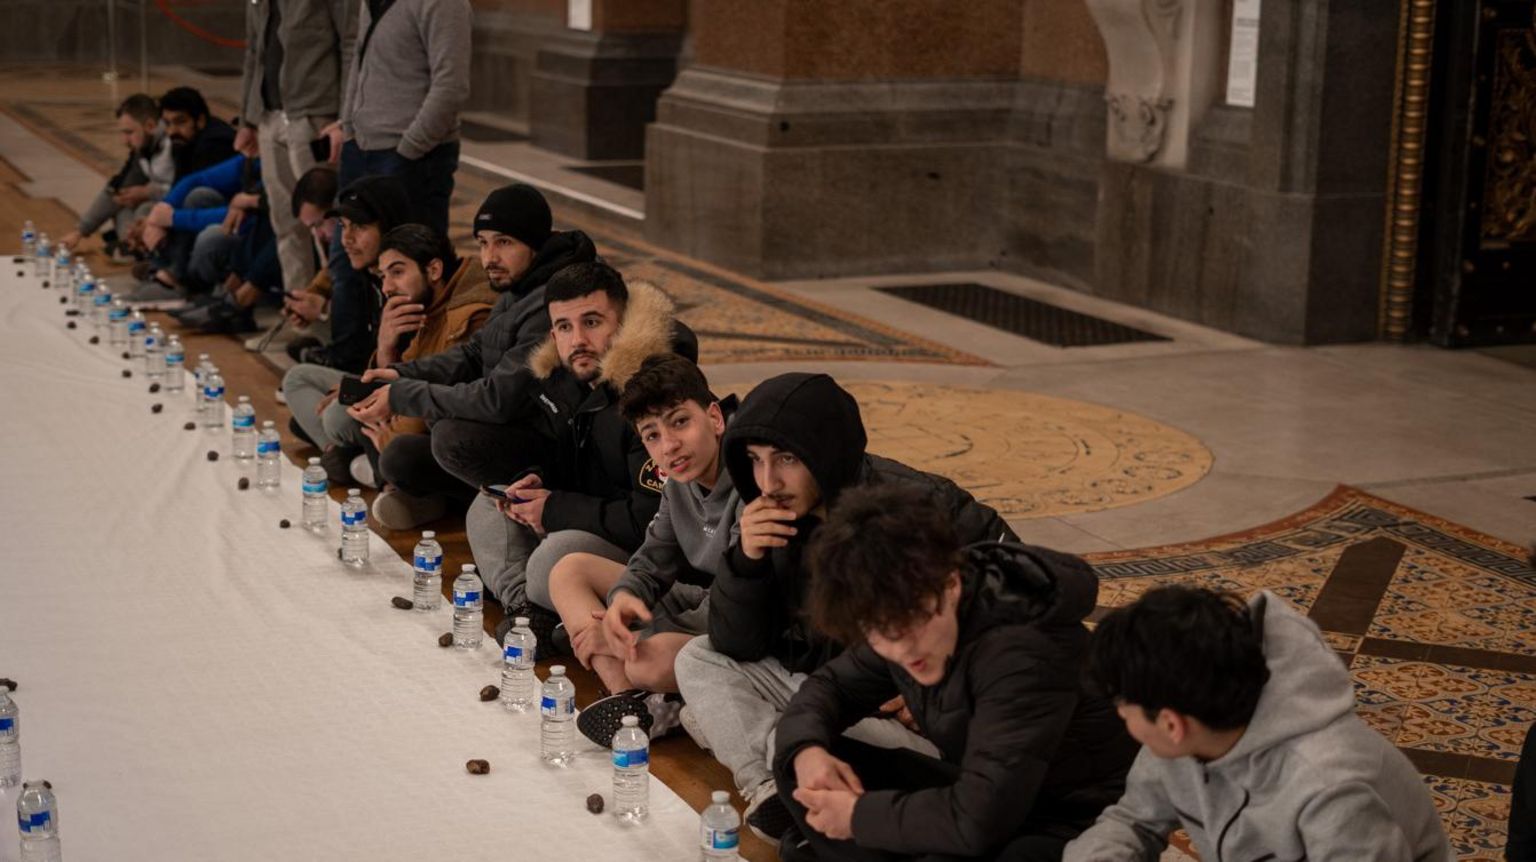 People attending an iftar event at St George's Hall in Liverpool